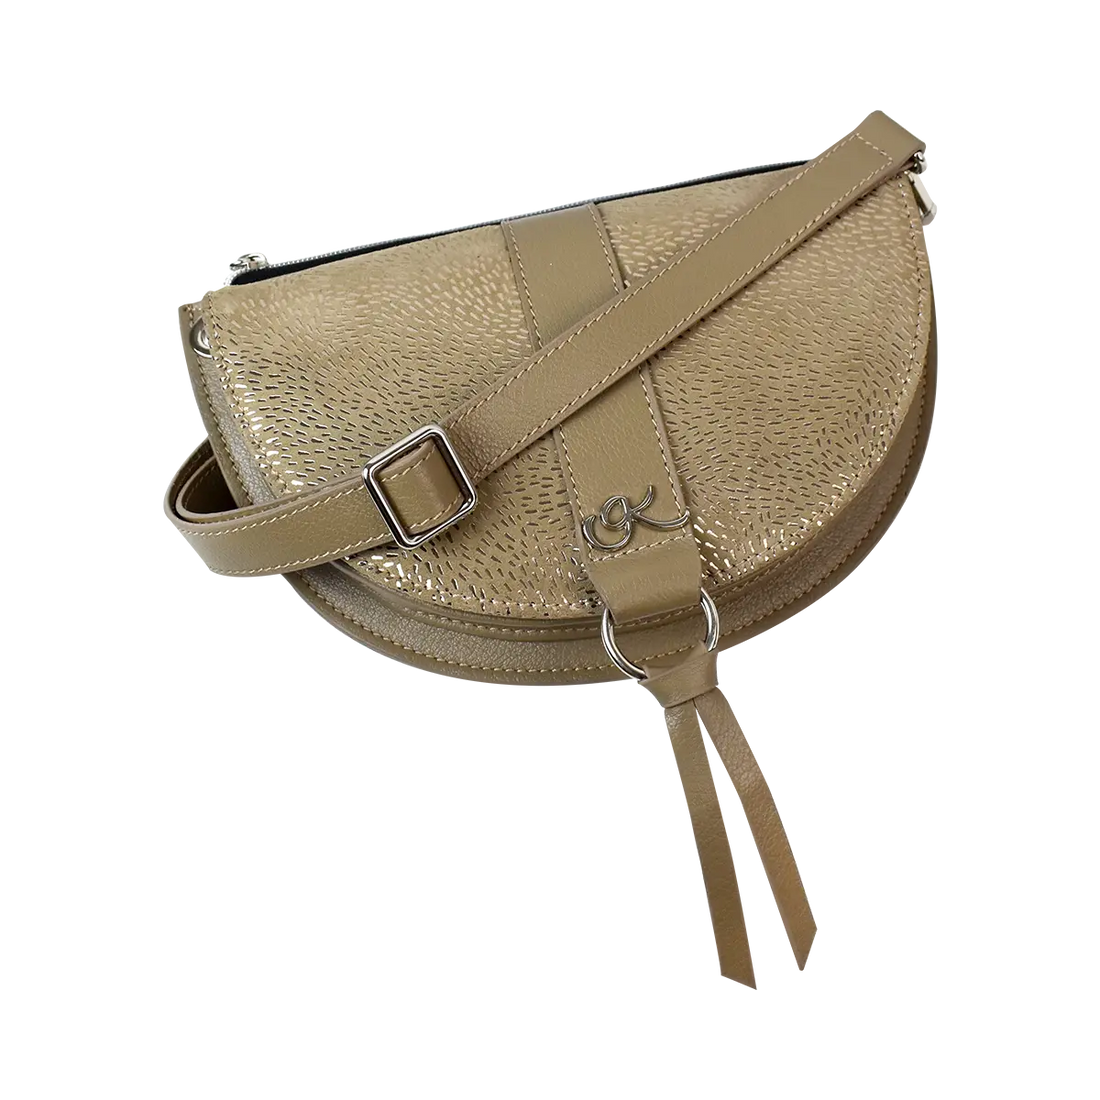 tan strip leather crossbody bag and fanny pack. Accessory for women in San Diego, CA.